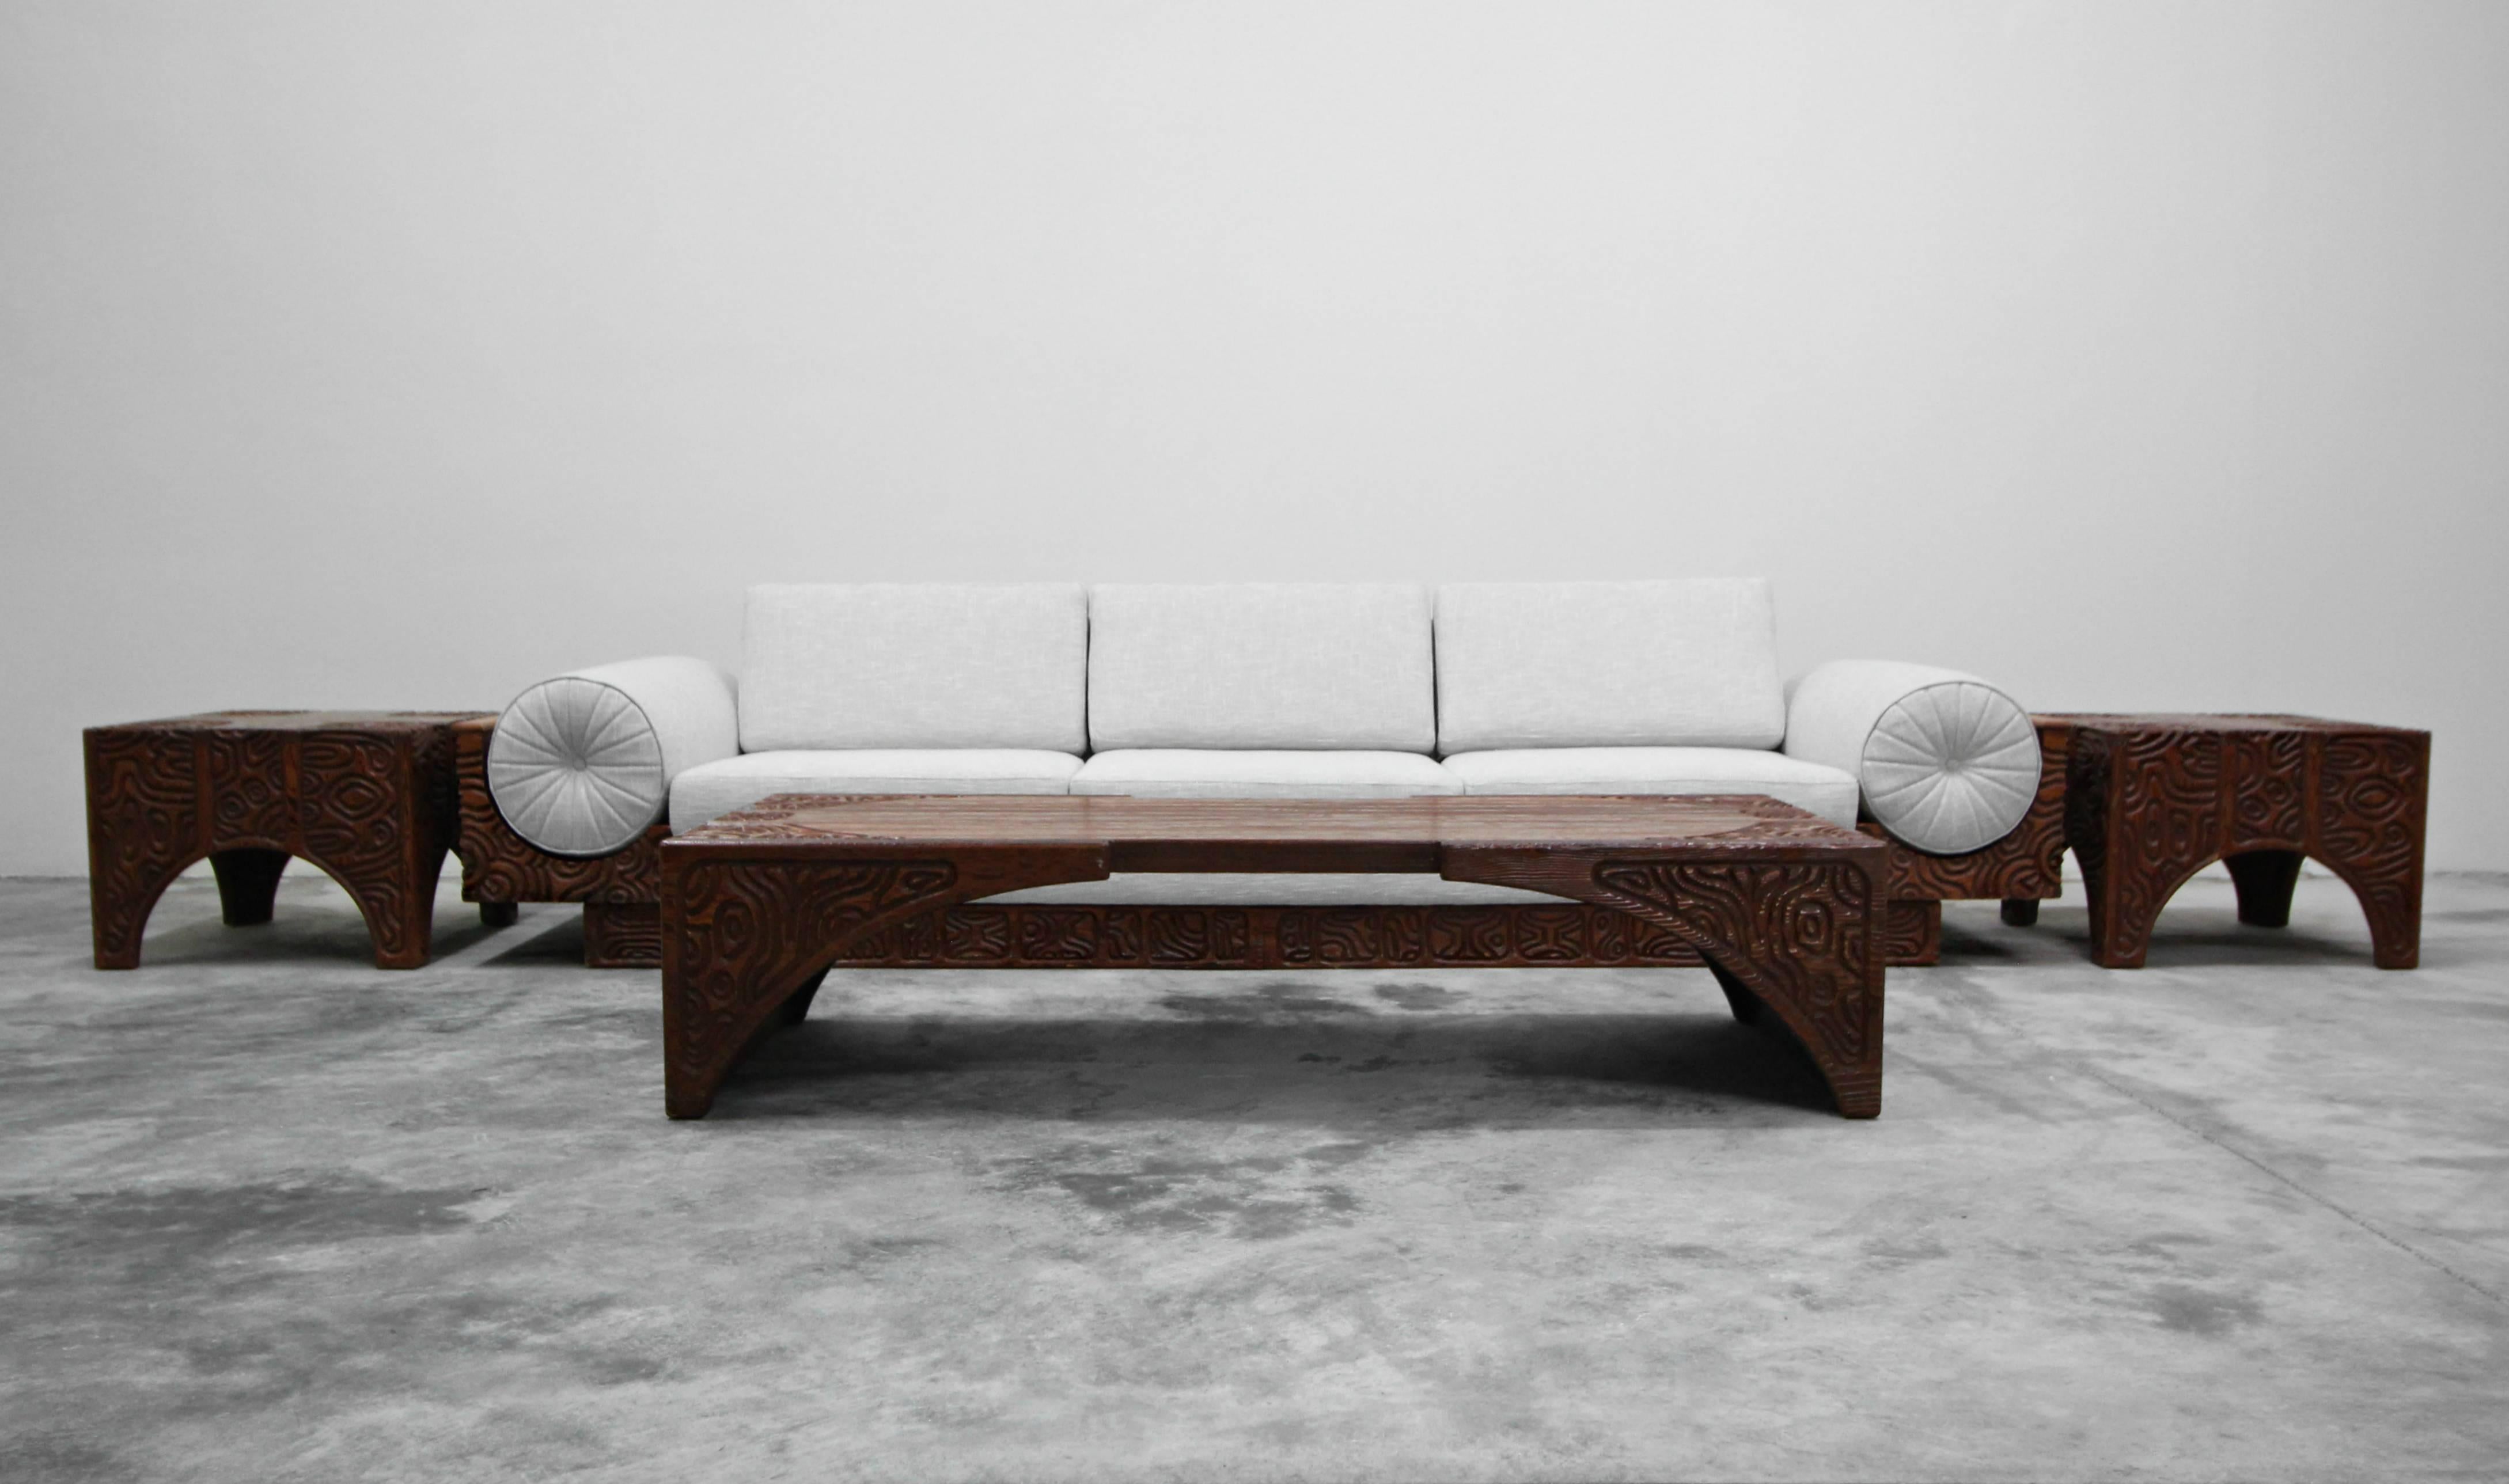 20th Century Monumental Panelcarve Style Carved Wood Sofa, attributed to Sherrill Broudy